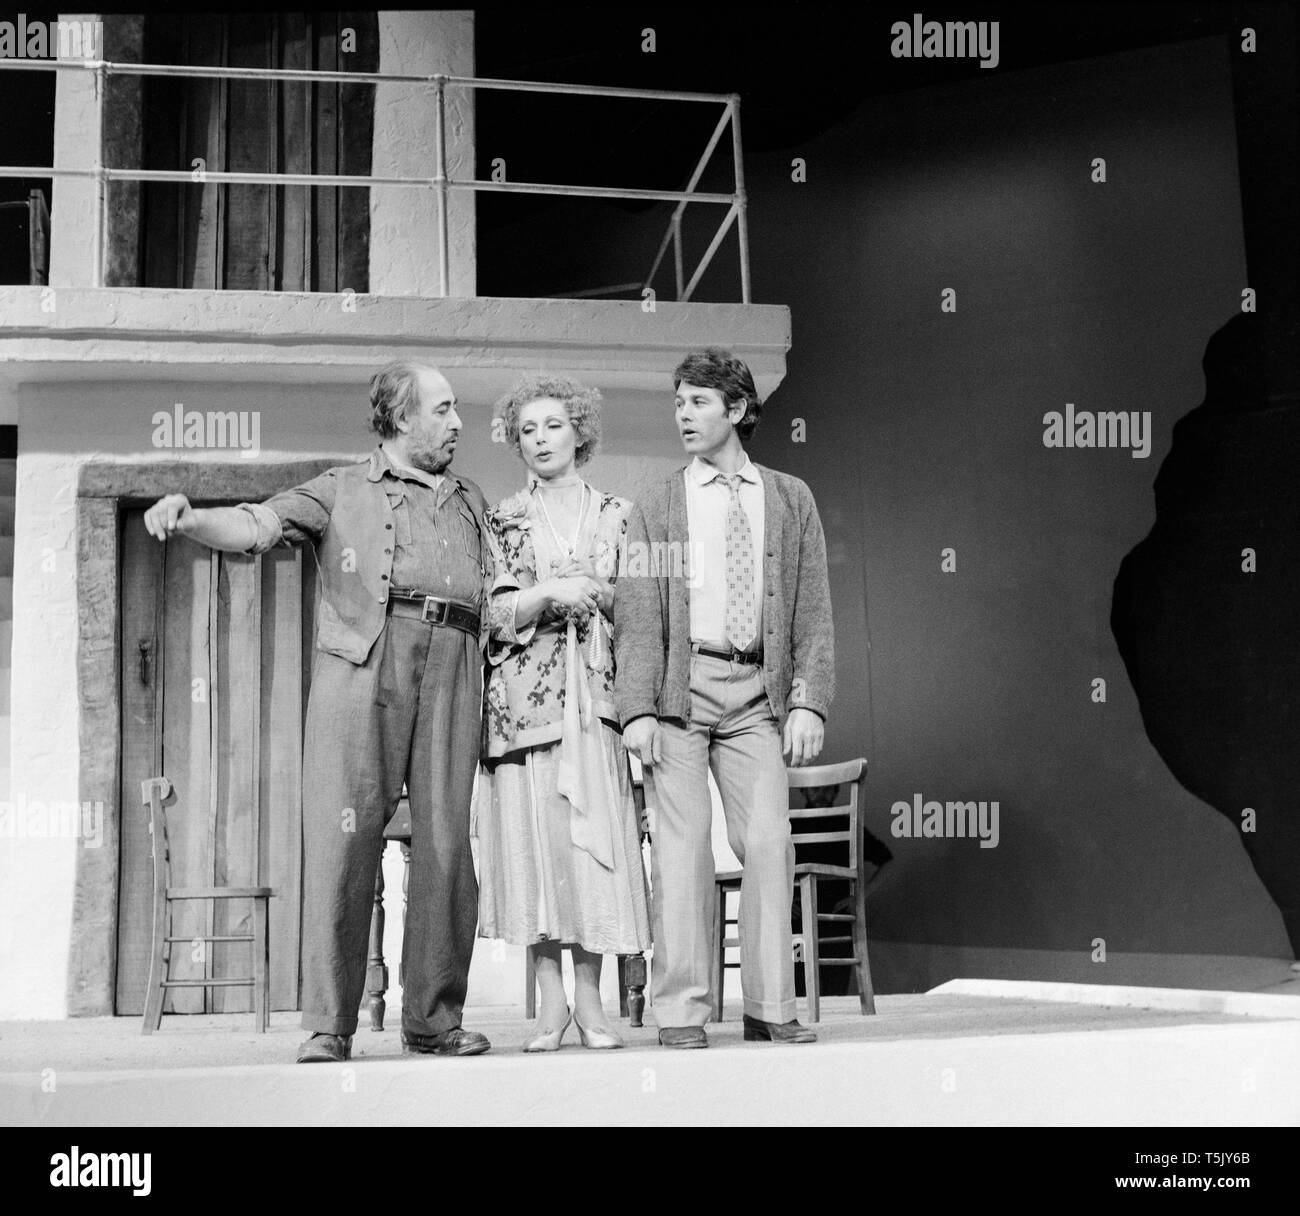 English actor Alfred Marks, Scottish actor Jim Smilie, and English actress Miriam Karlin, on stage at The Greenwich theatre in London, during rehearsals for the play Zorba, in November 1973. Marks played the role of Zorba, Karlin the role of Madame Hortense, and Smilie the role of Nikos. Stock Photo